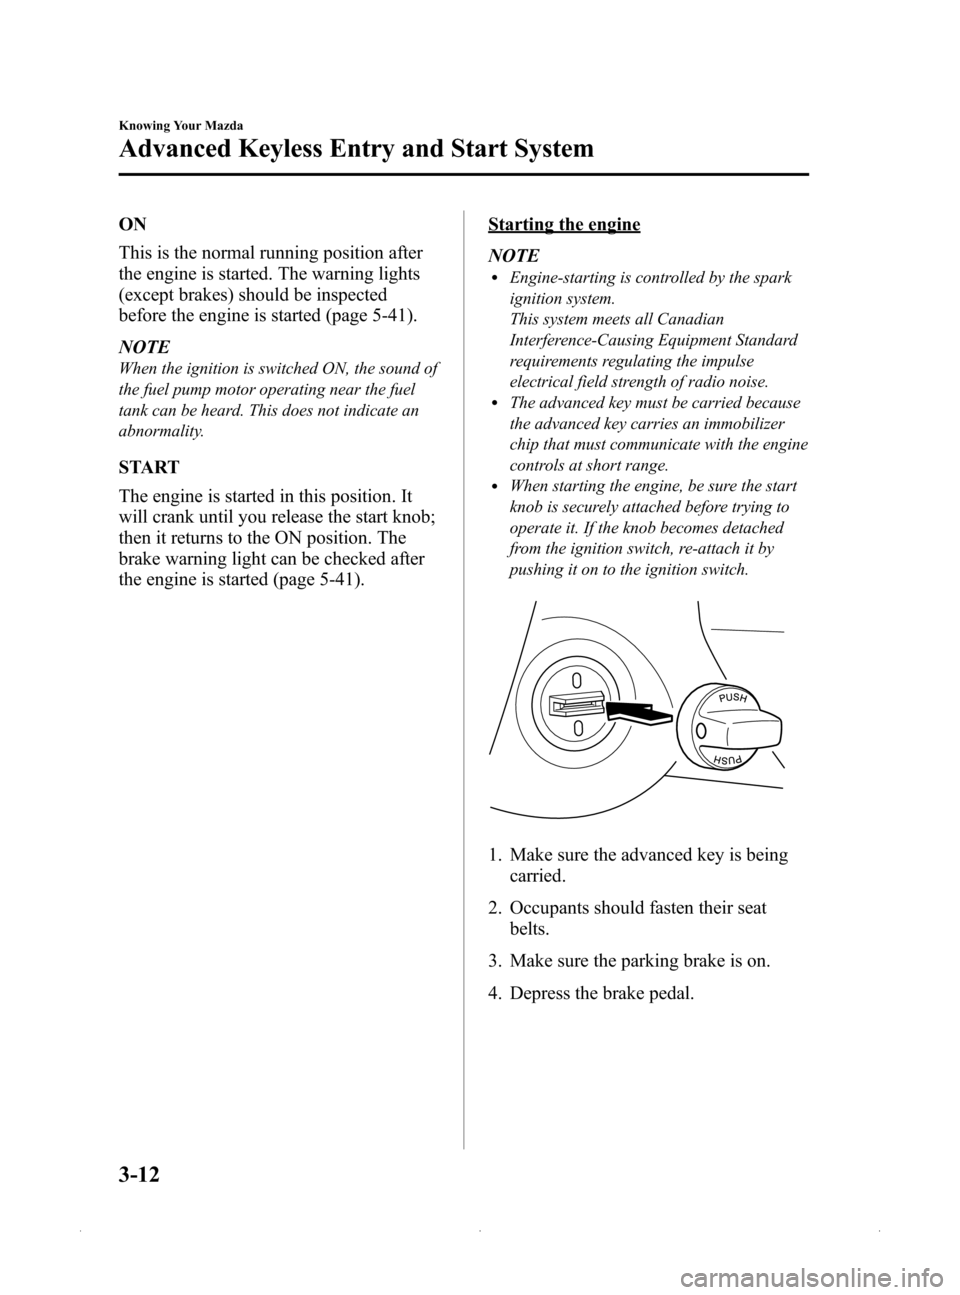 MAZDA MODEL MX-5 PRHT 2015  Owners Manual (in English) Black plate (66,1)
ON
This is the normal running position after
the engine is started. The warning lights
(except brakes) should be inspected
before the engine is started (page 5-41).
NOTE
When the ig